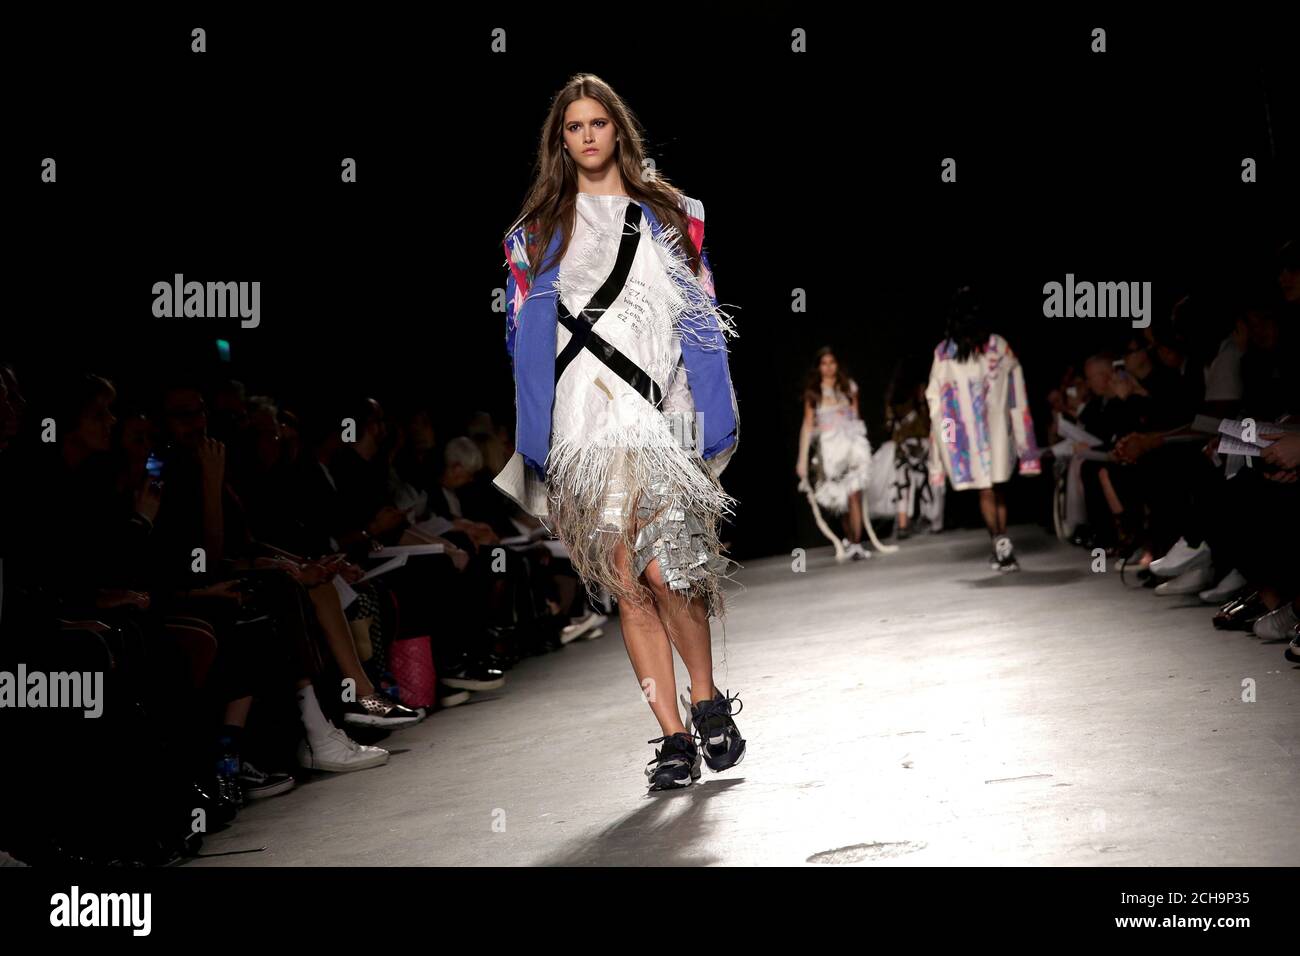 A model on the catwalk during the Liam O'Sullivan University of ...